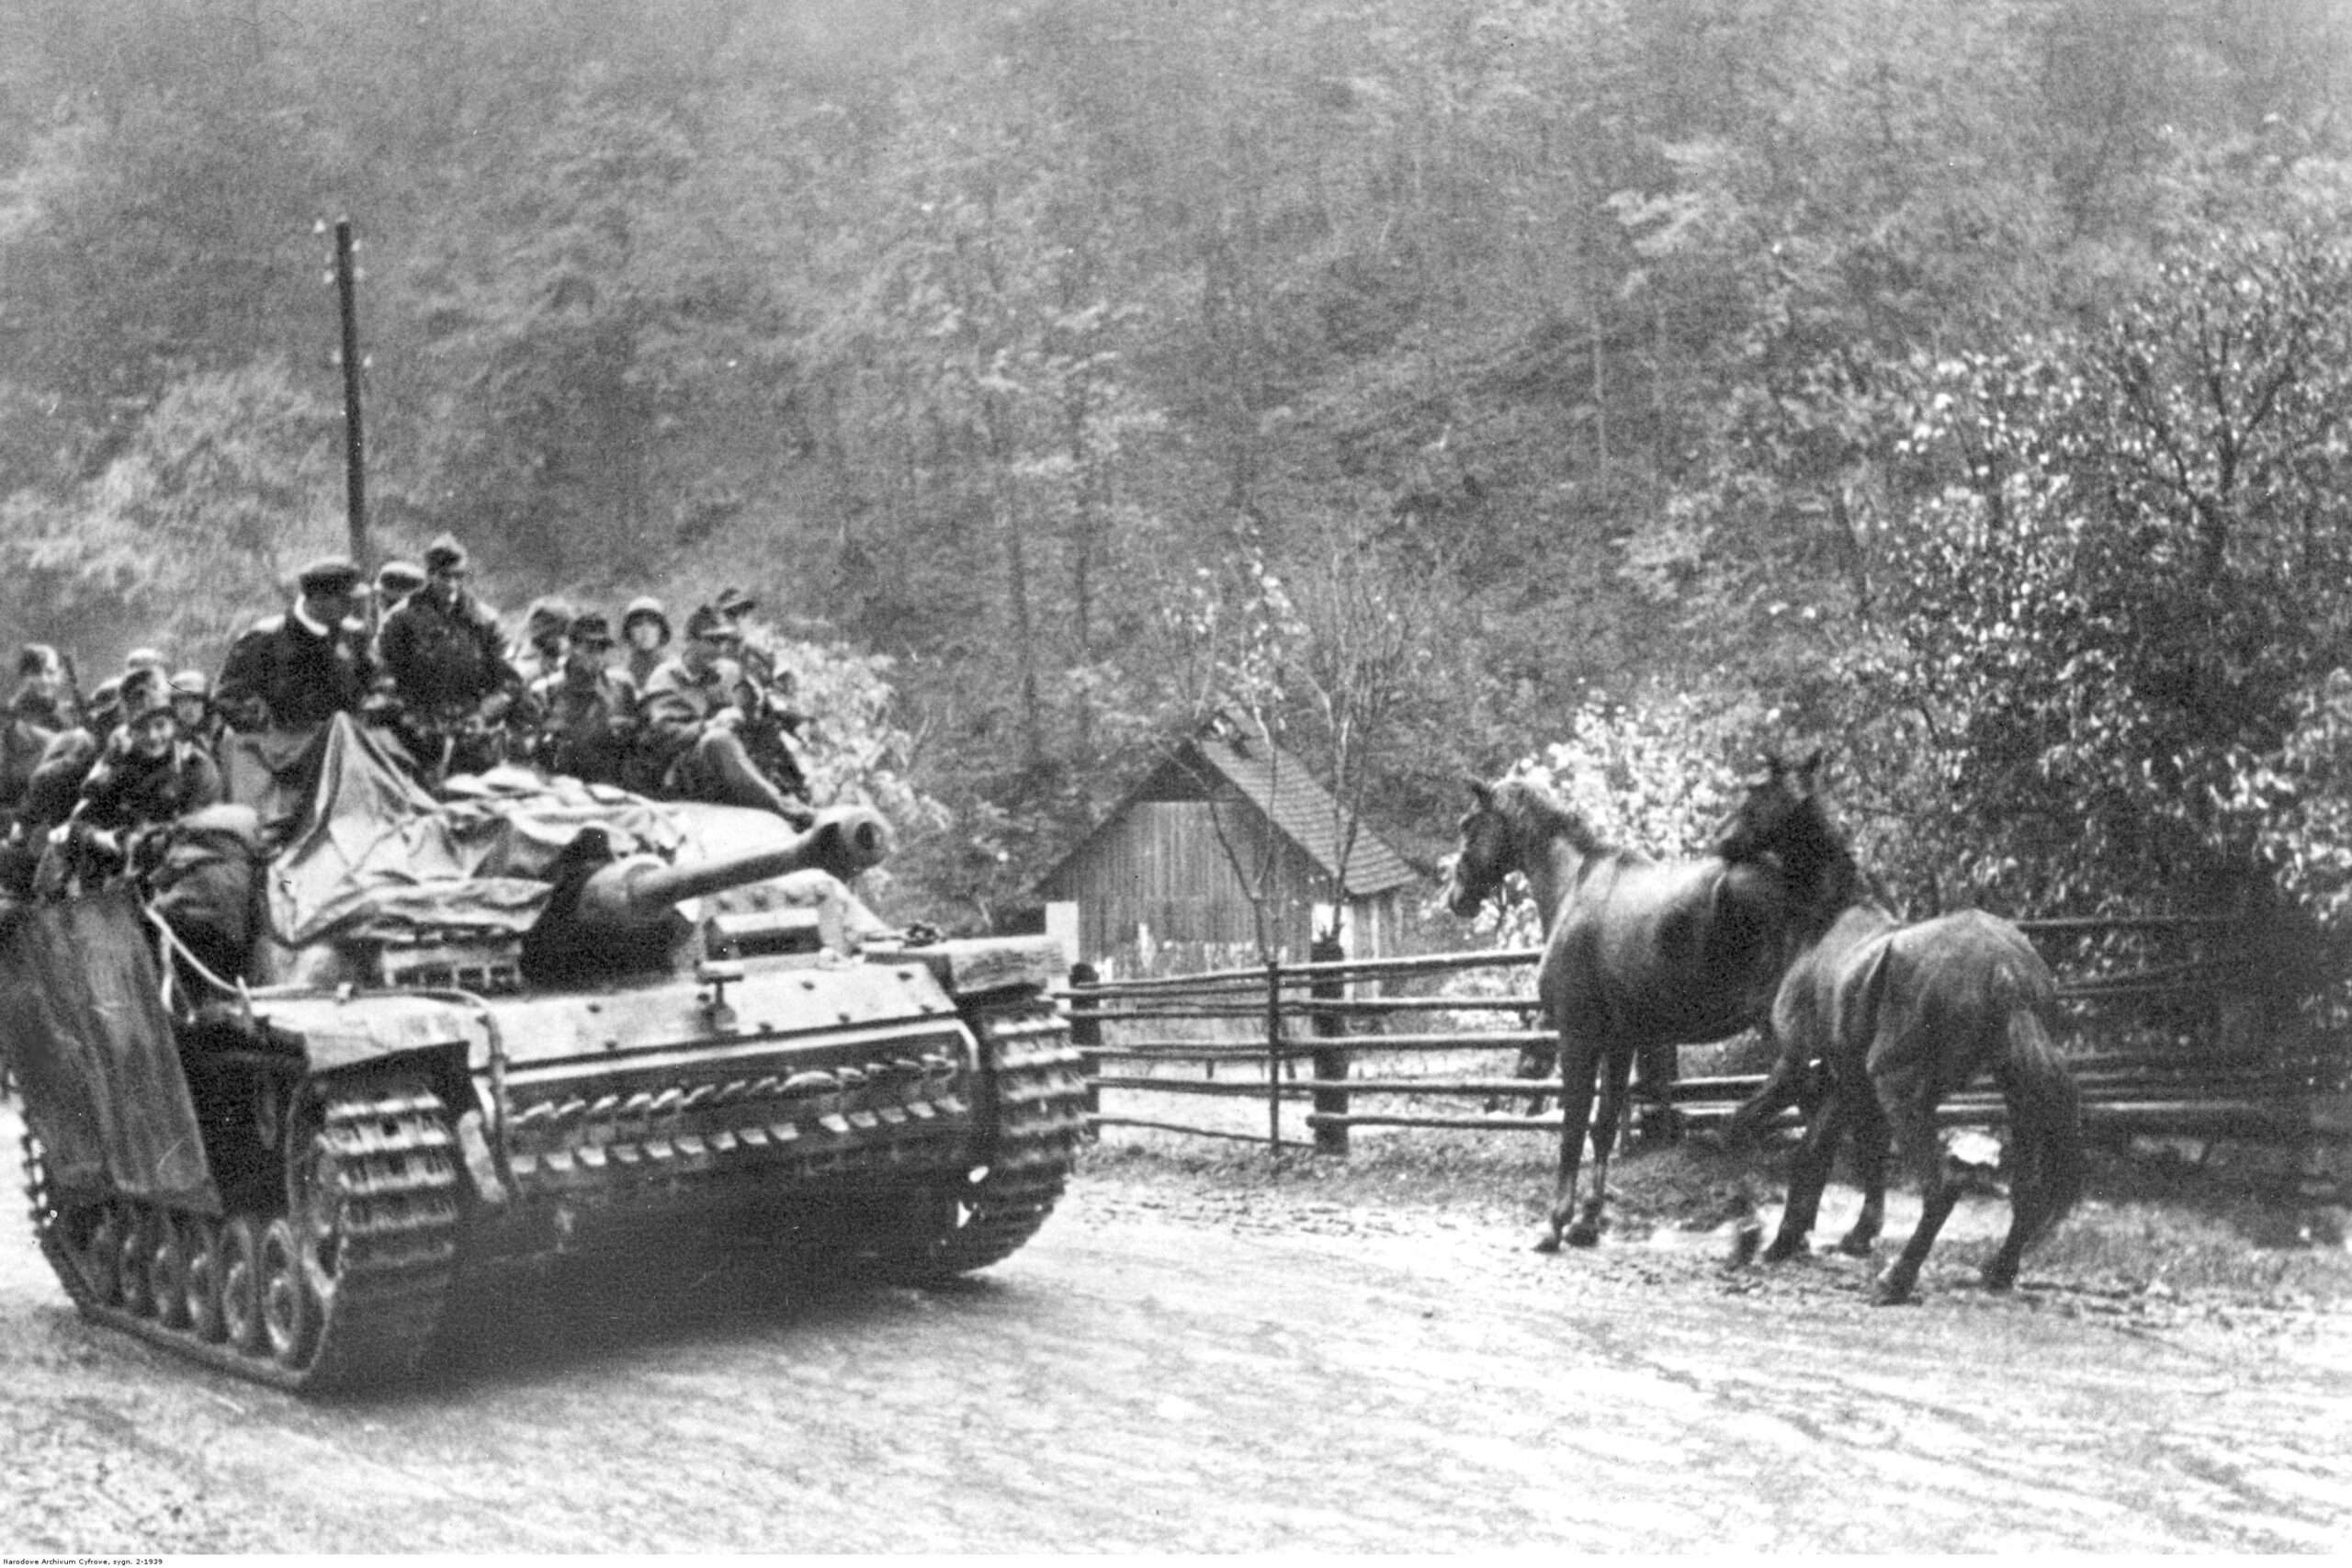 StuG III Ausf G in Slovakia, soldiers of the 18th Waffen SS Grenadier Division take a ride. Note the scared horses. Date December, 1944.